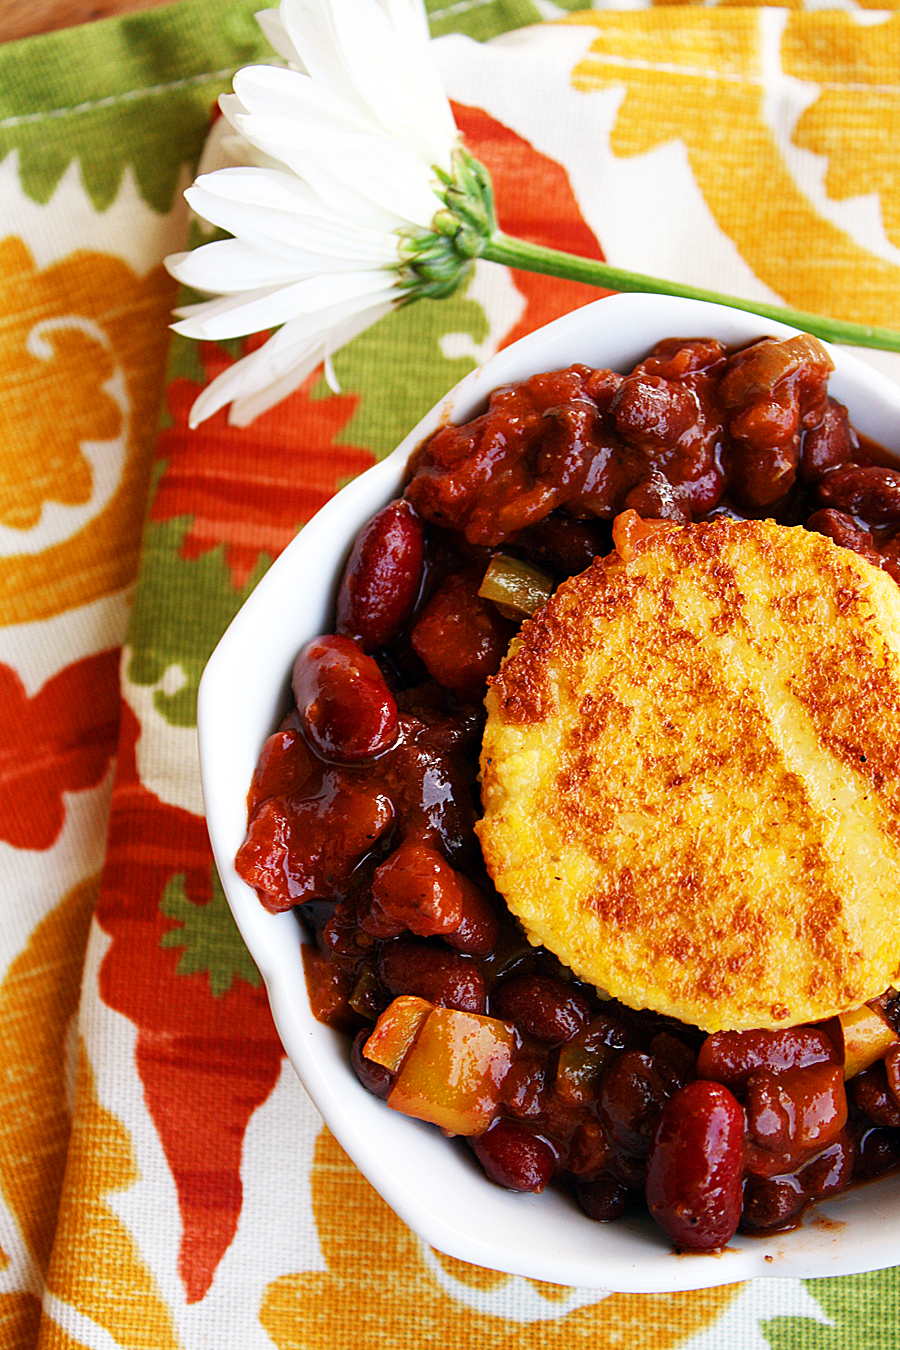 Hearty Vegetarian Chili with Polenta Cakes